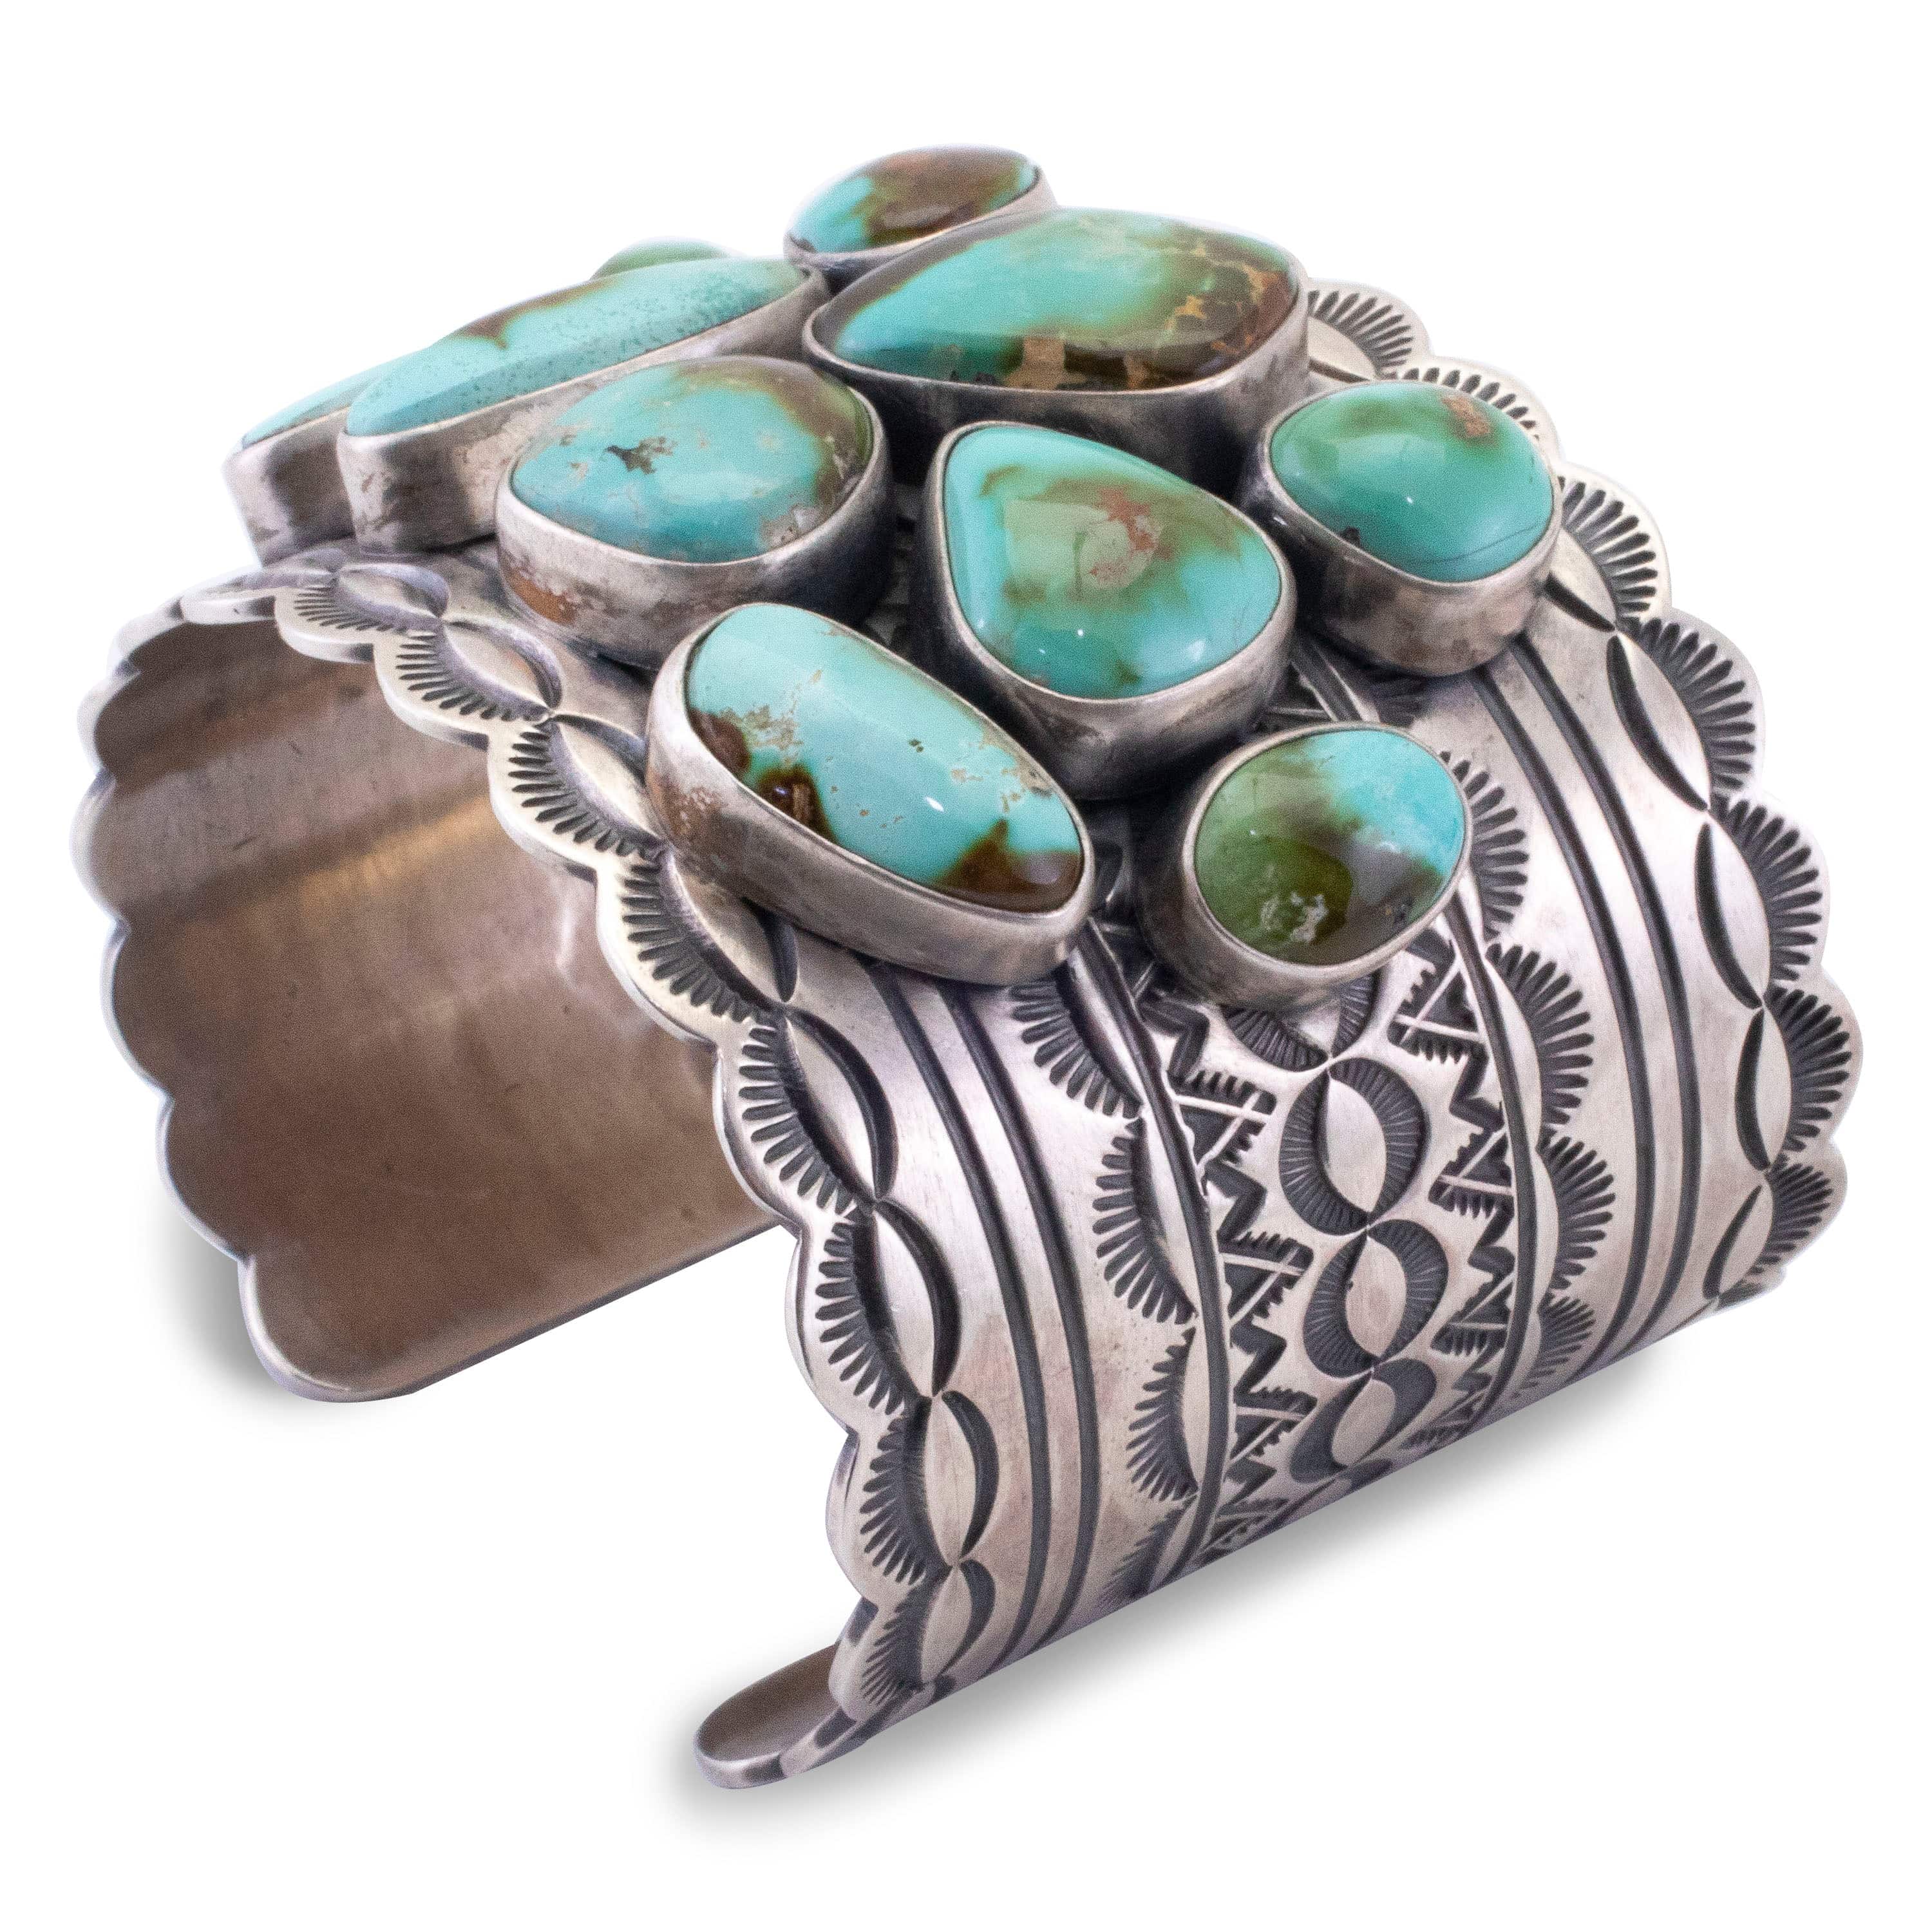 Kalifano Native American Jewelry Ray Bennett Navajo Royston Turquoise USA Native American Made 925 Sterling Silver Cuff NAB6000.002